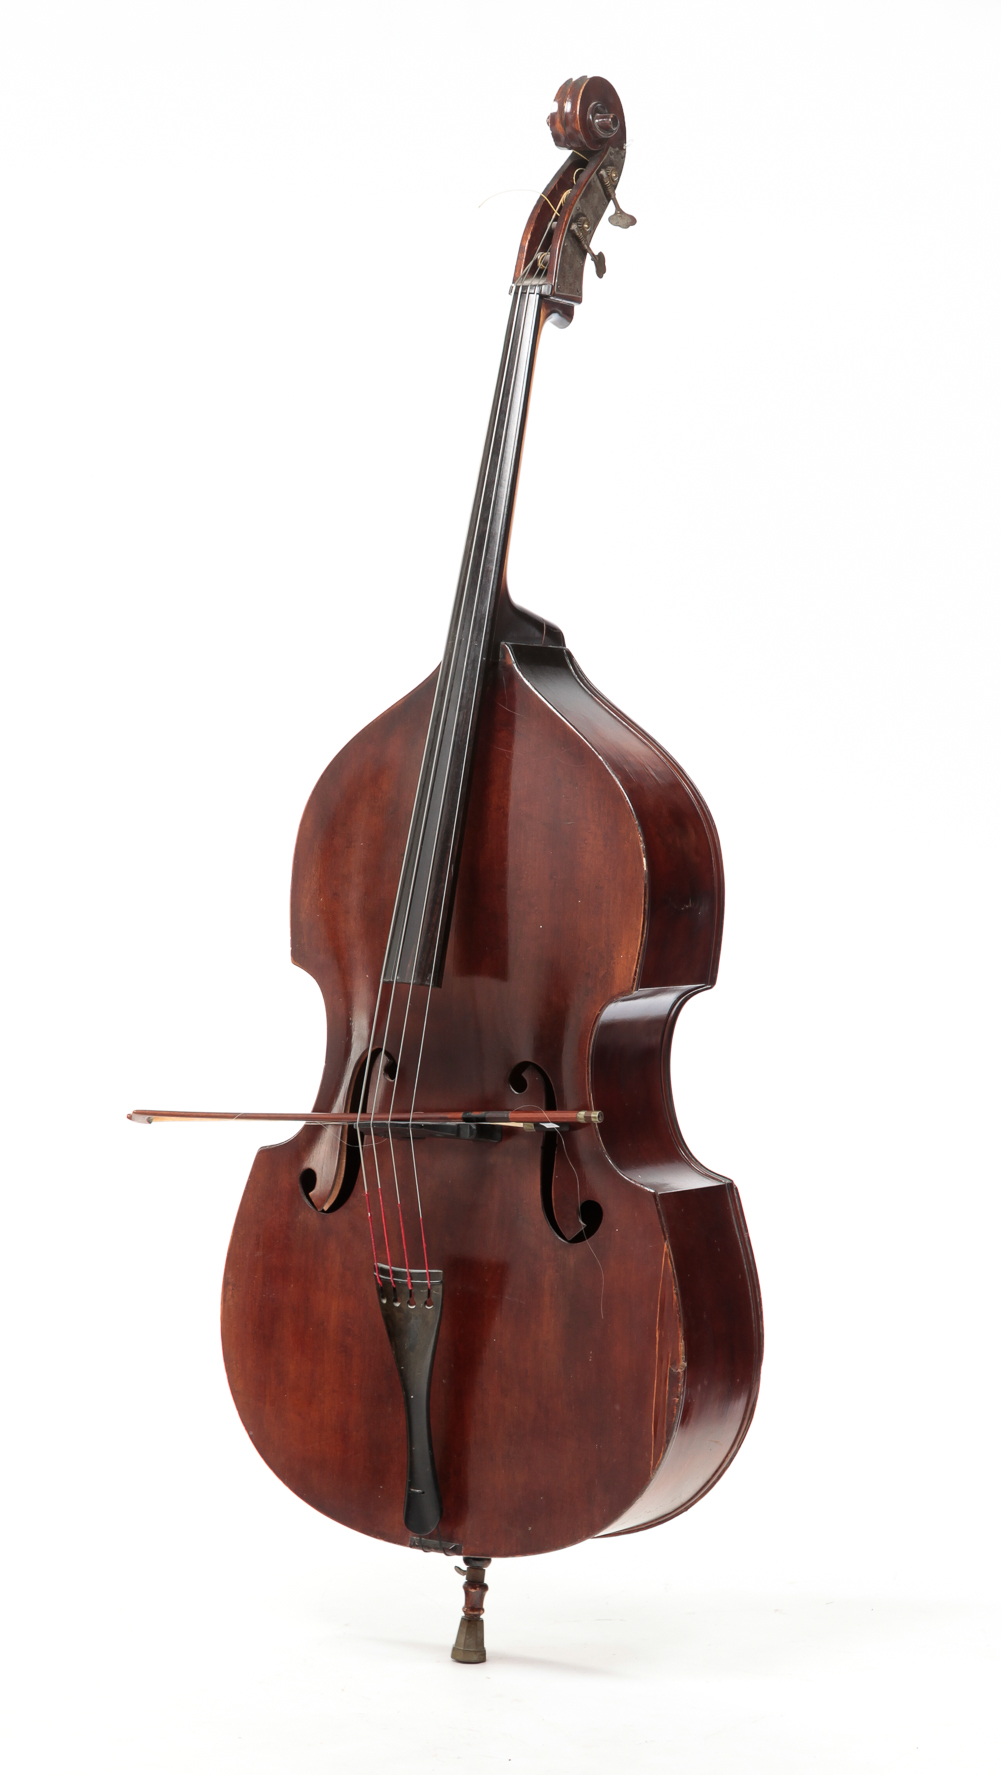 AMERICAN DOUBLE BASS WITH BAUSCH 2dfe89